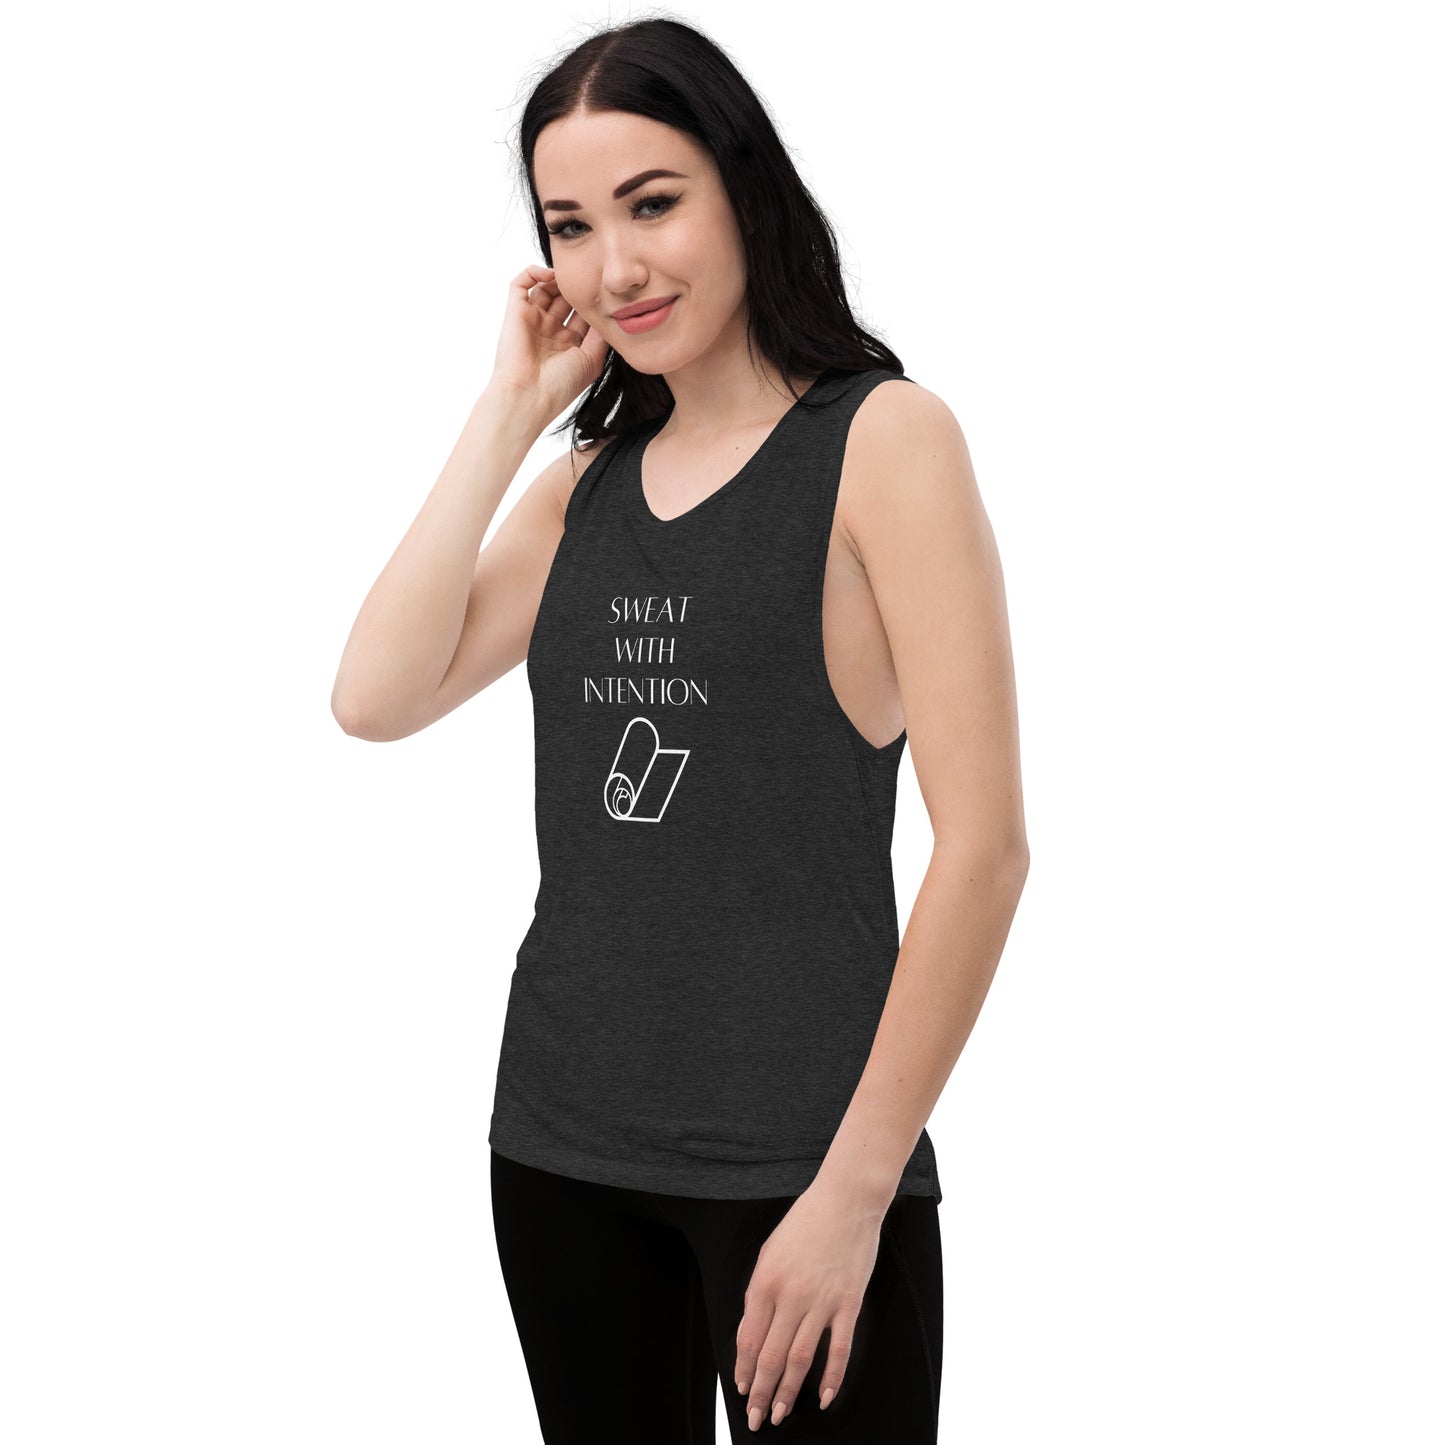 Sweat with Intention Ladies’ Muscle Tank